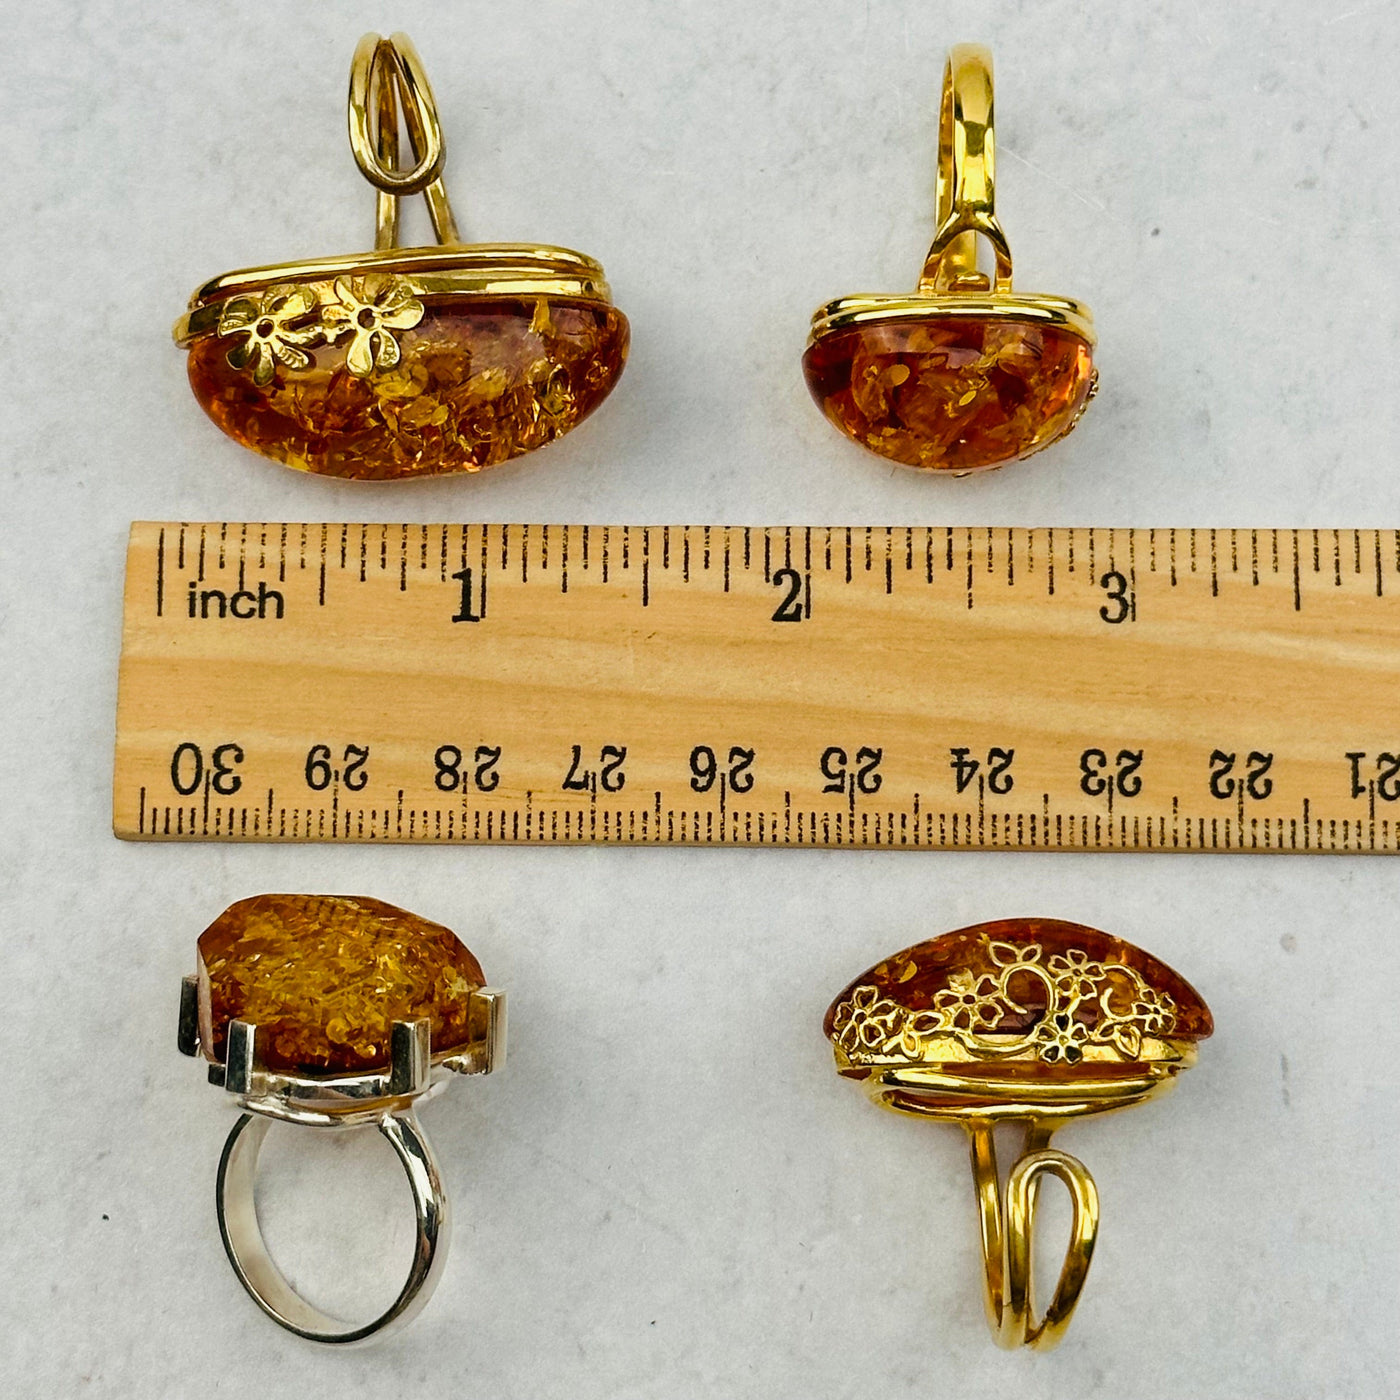 amber rings next to a ruler for size reference 